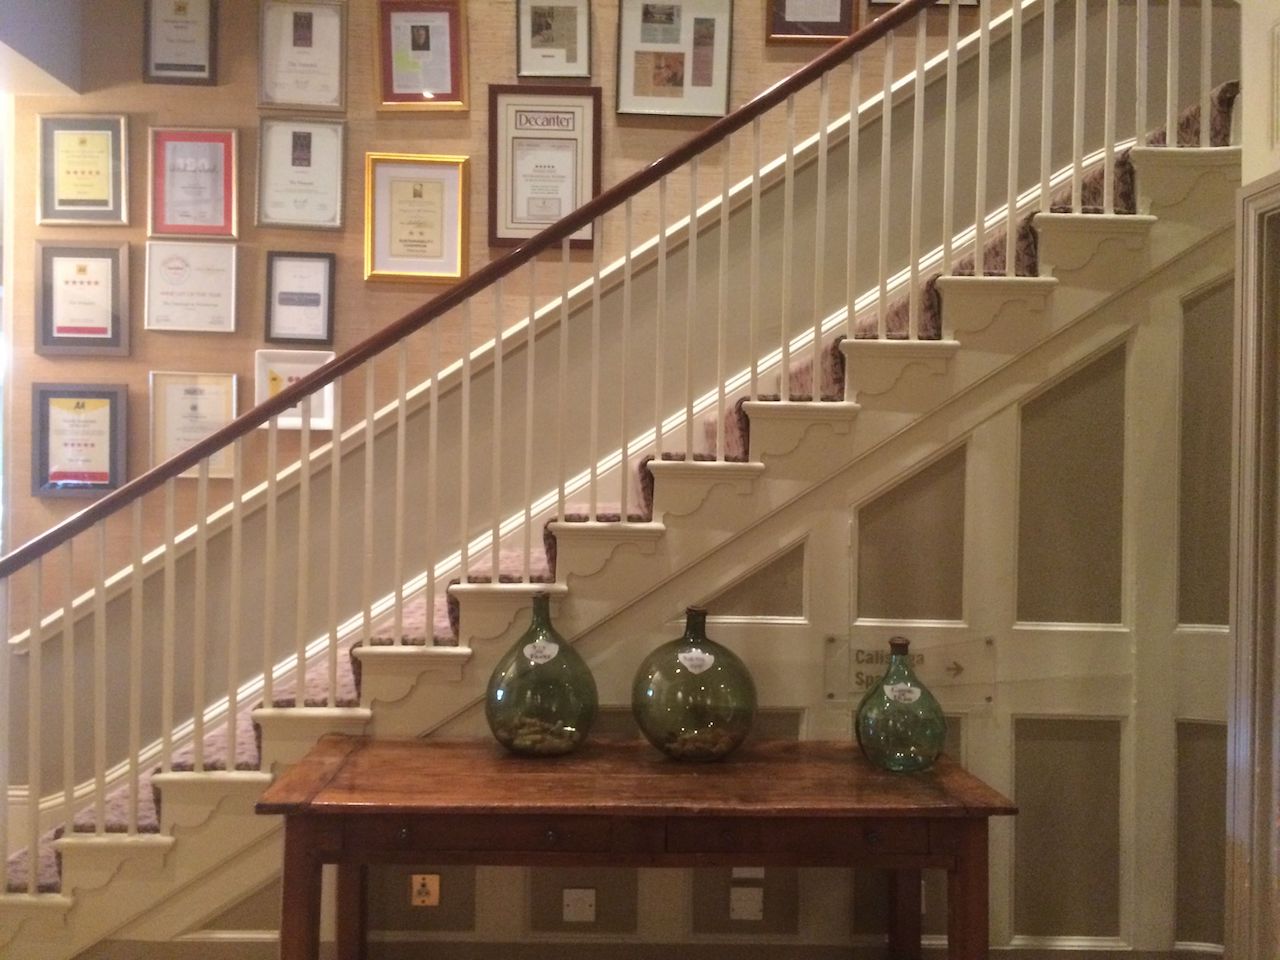 Award certificates line the stairs at The Vineyard Hotel